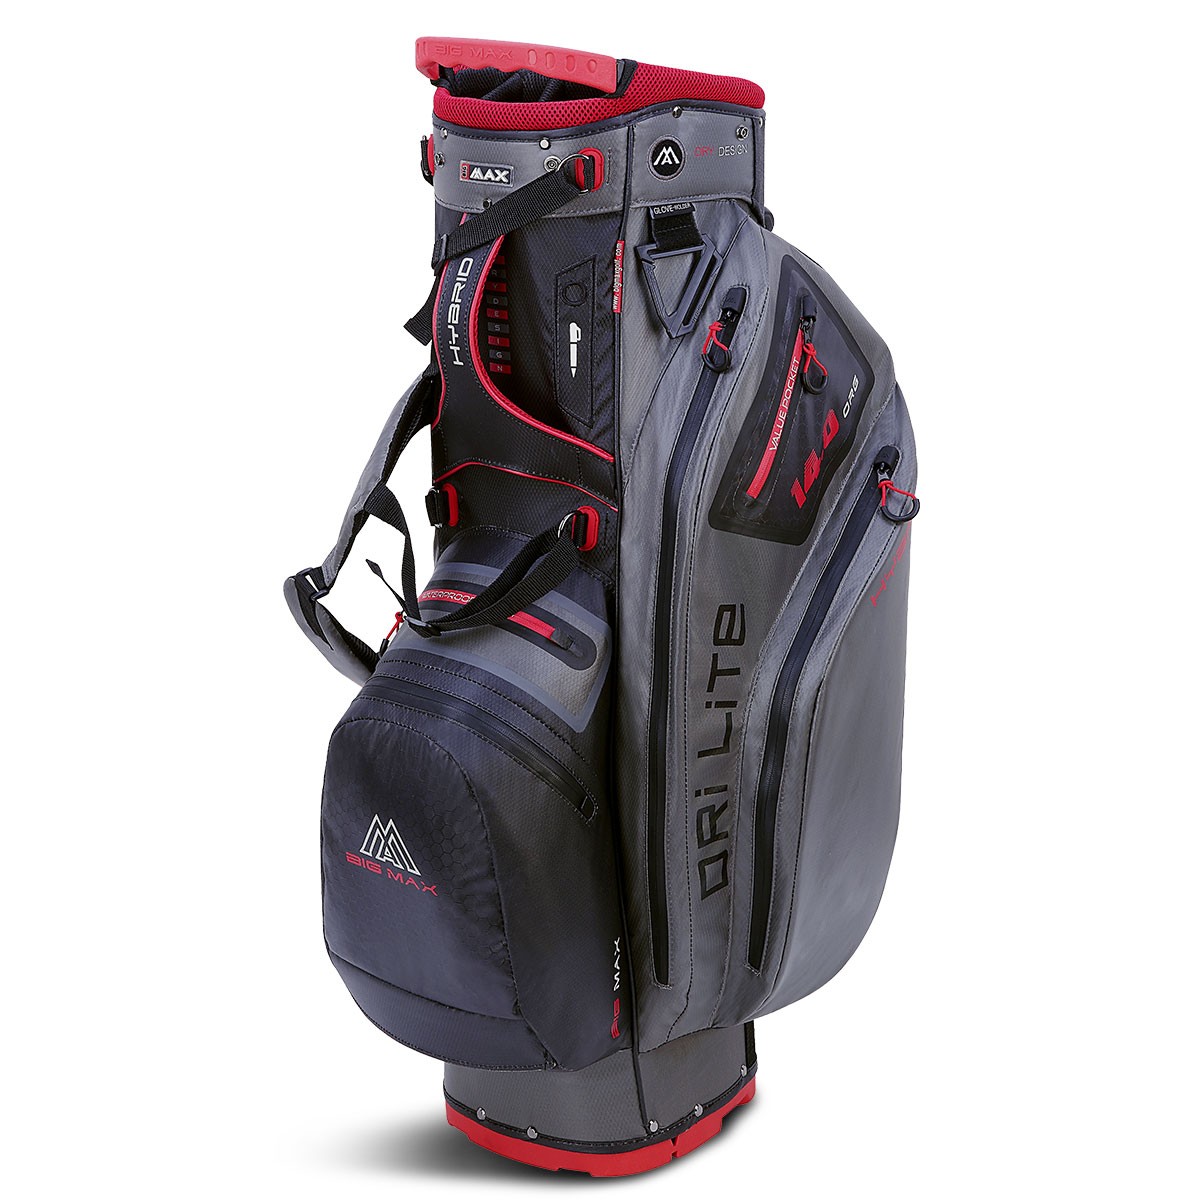 BIG MAX Dri Lite Hybrid 2 Water-Resistant Golf Stand Bag from american golf